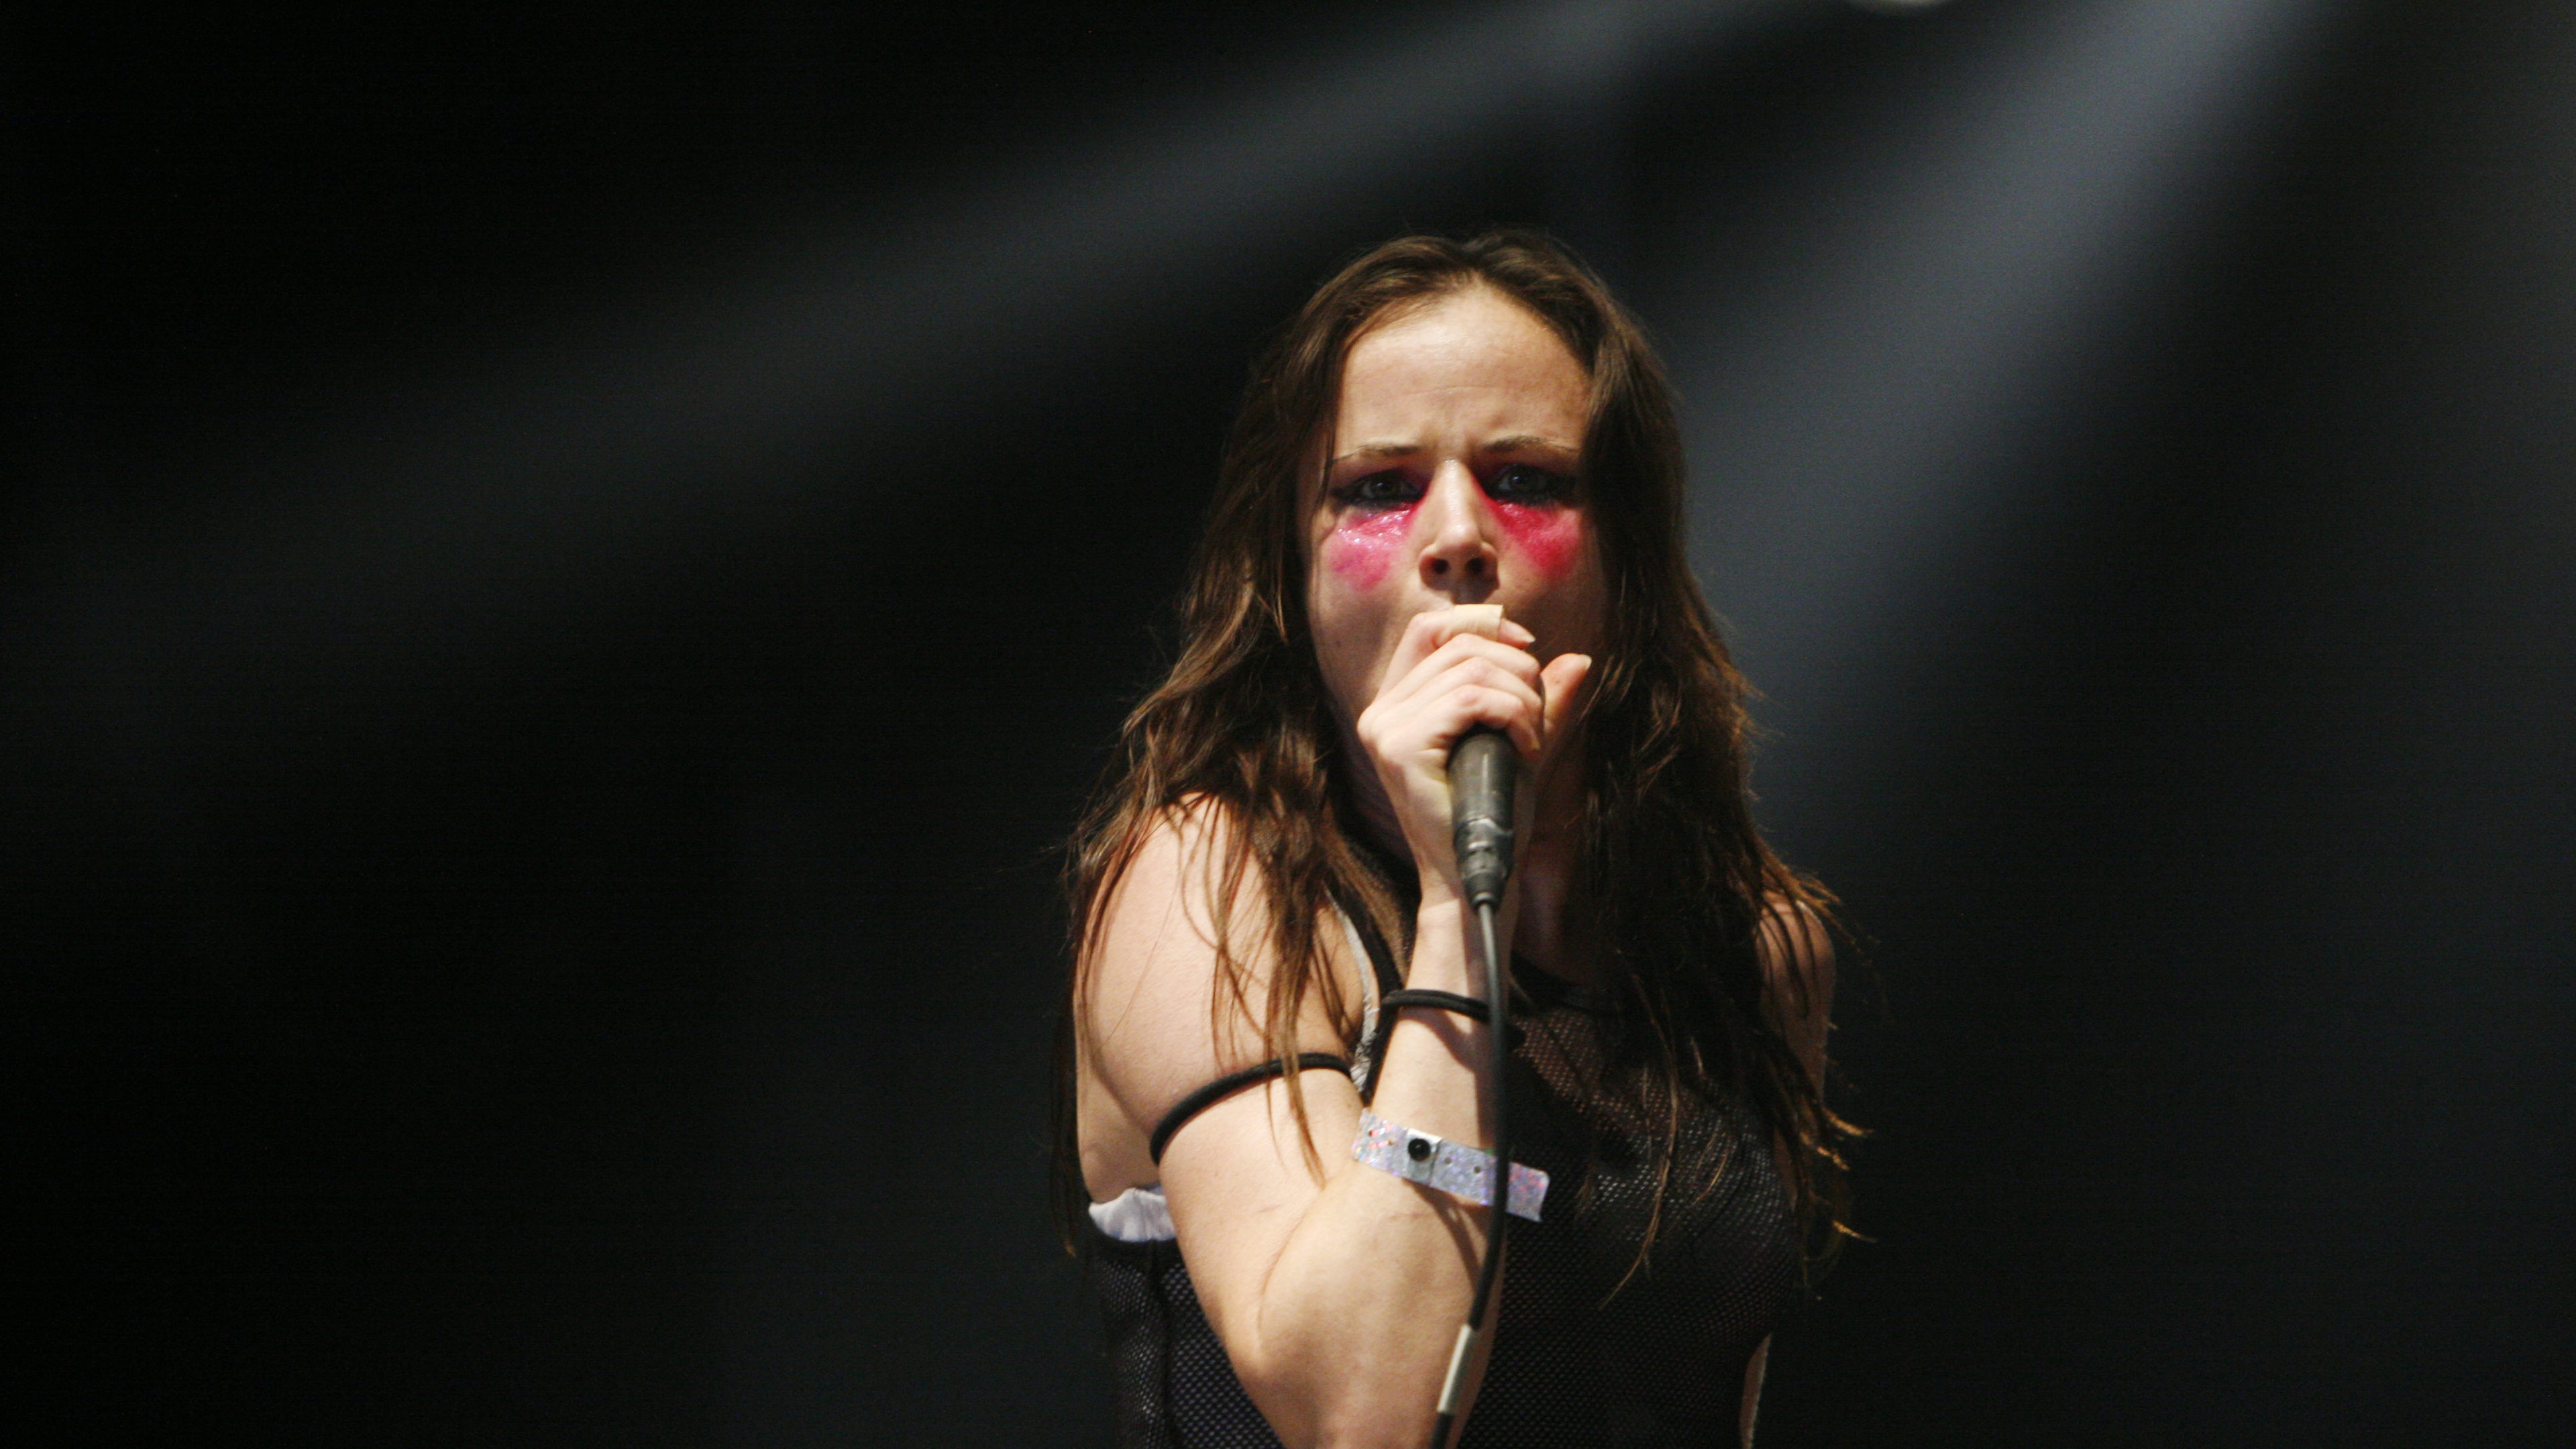 Juliette Lewis Singing for 3840 x 2160 Ultra HD resolution